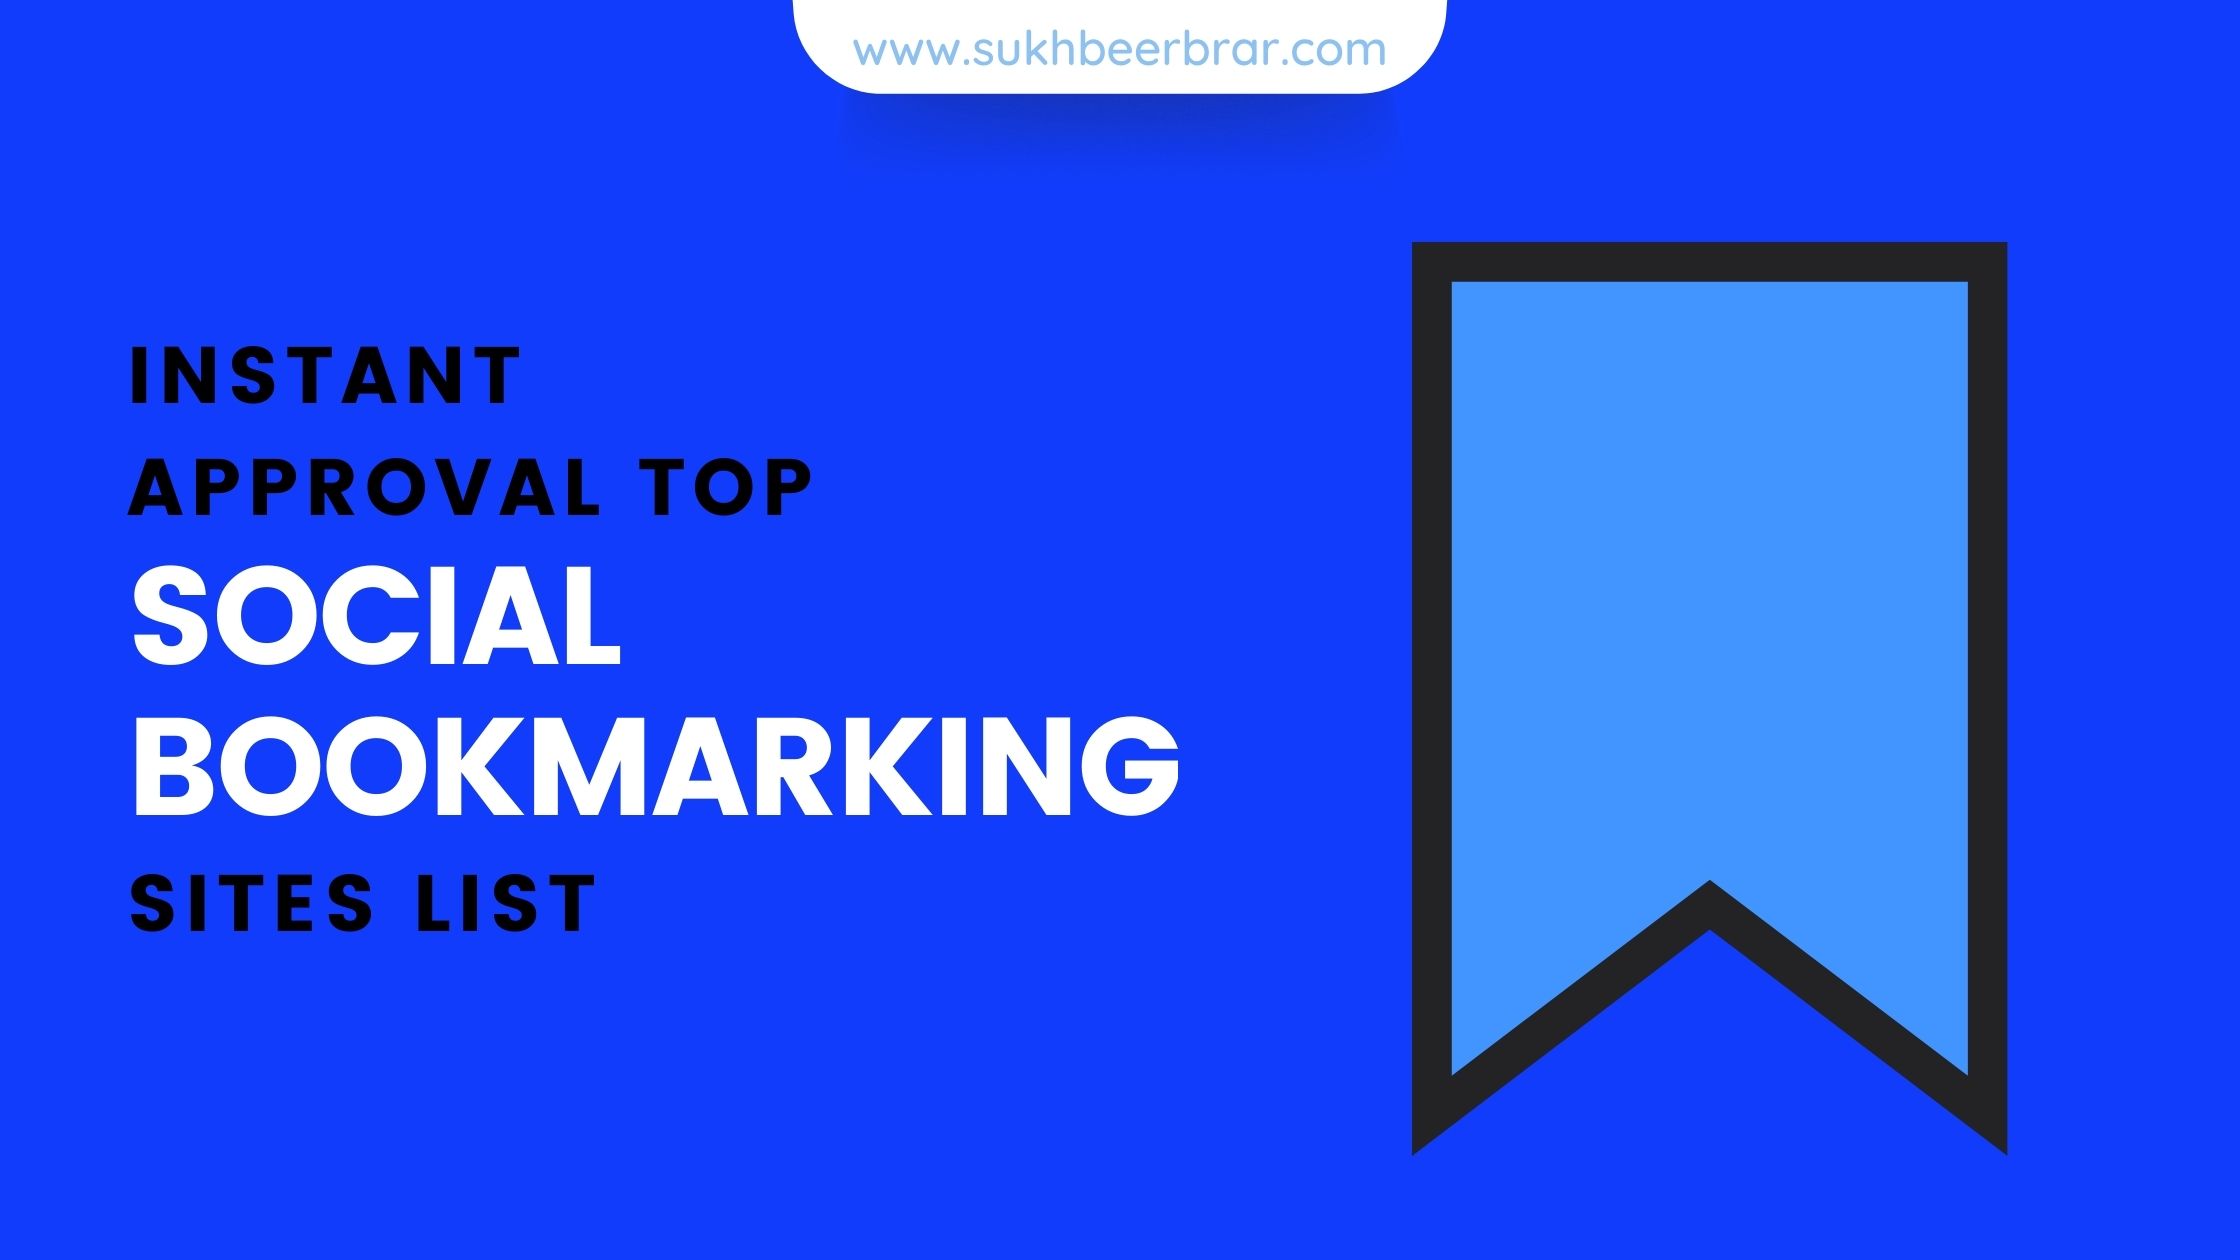 You are currently viewing Instant Approval Top Social Bookmarking Sites List & Guide 2022